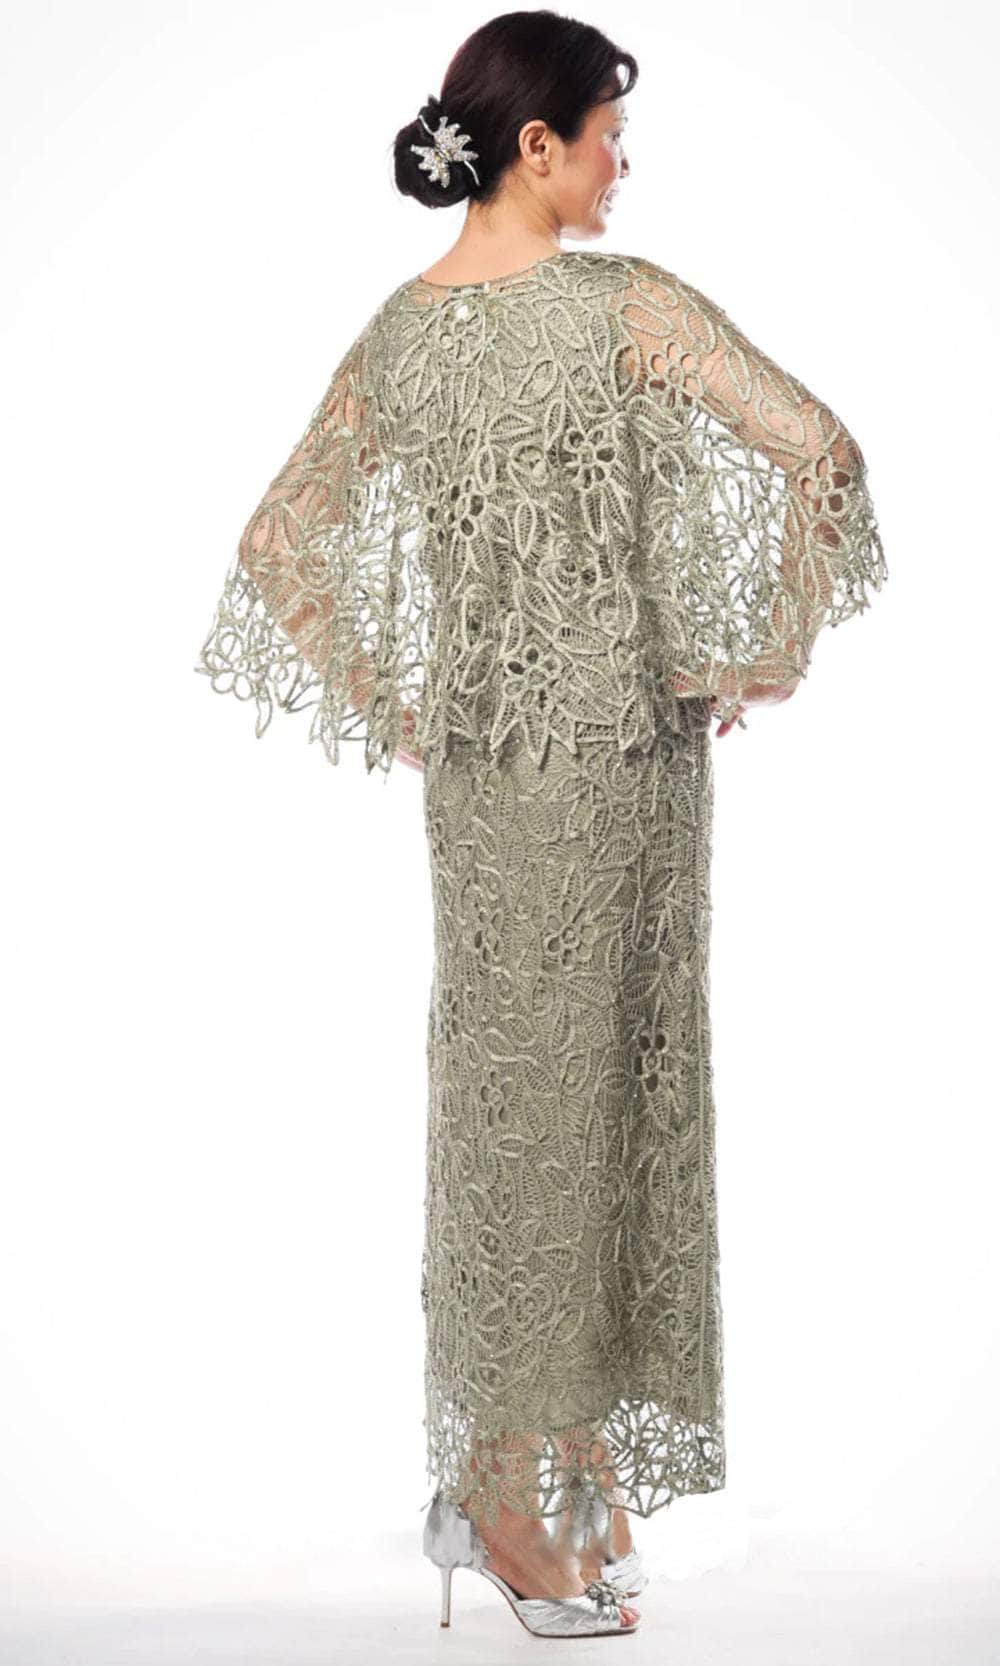 Soulmates C80312 - Beaded Lace Cape Top And Skirt Set Clothing Set Celadon / S